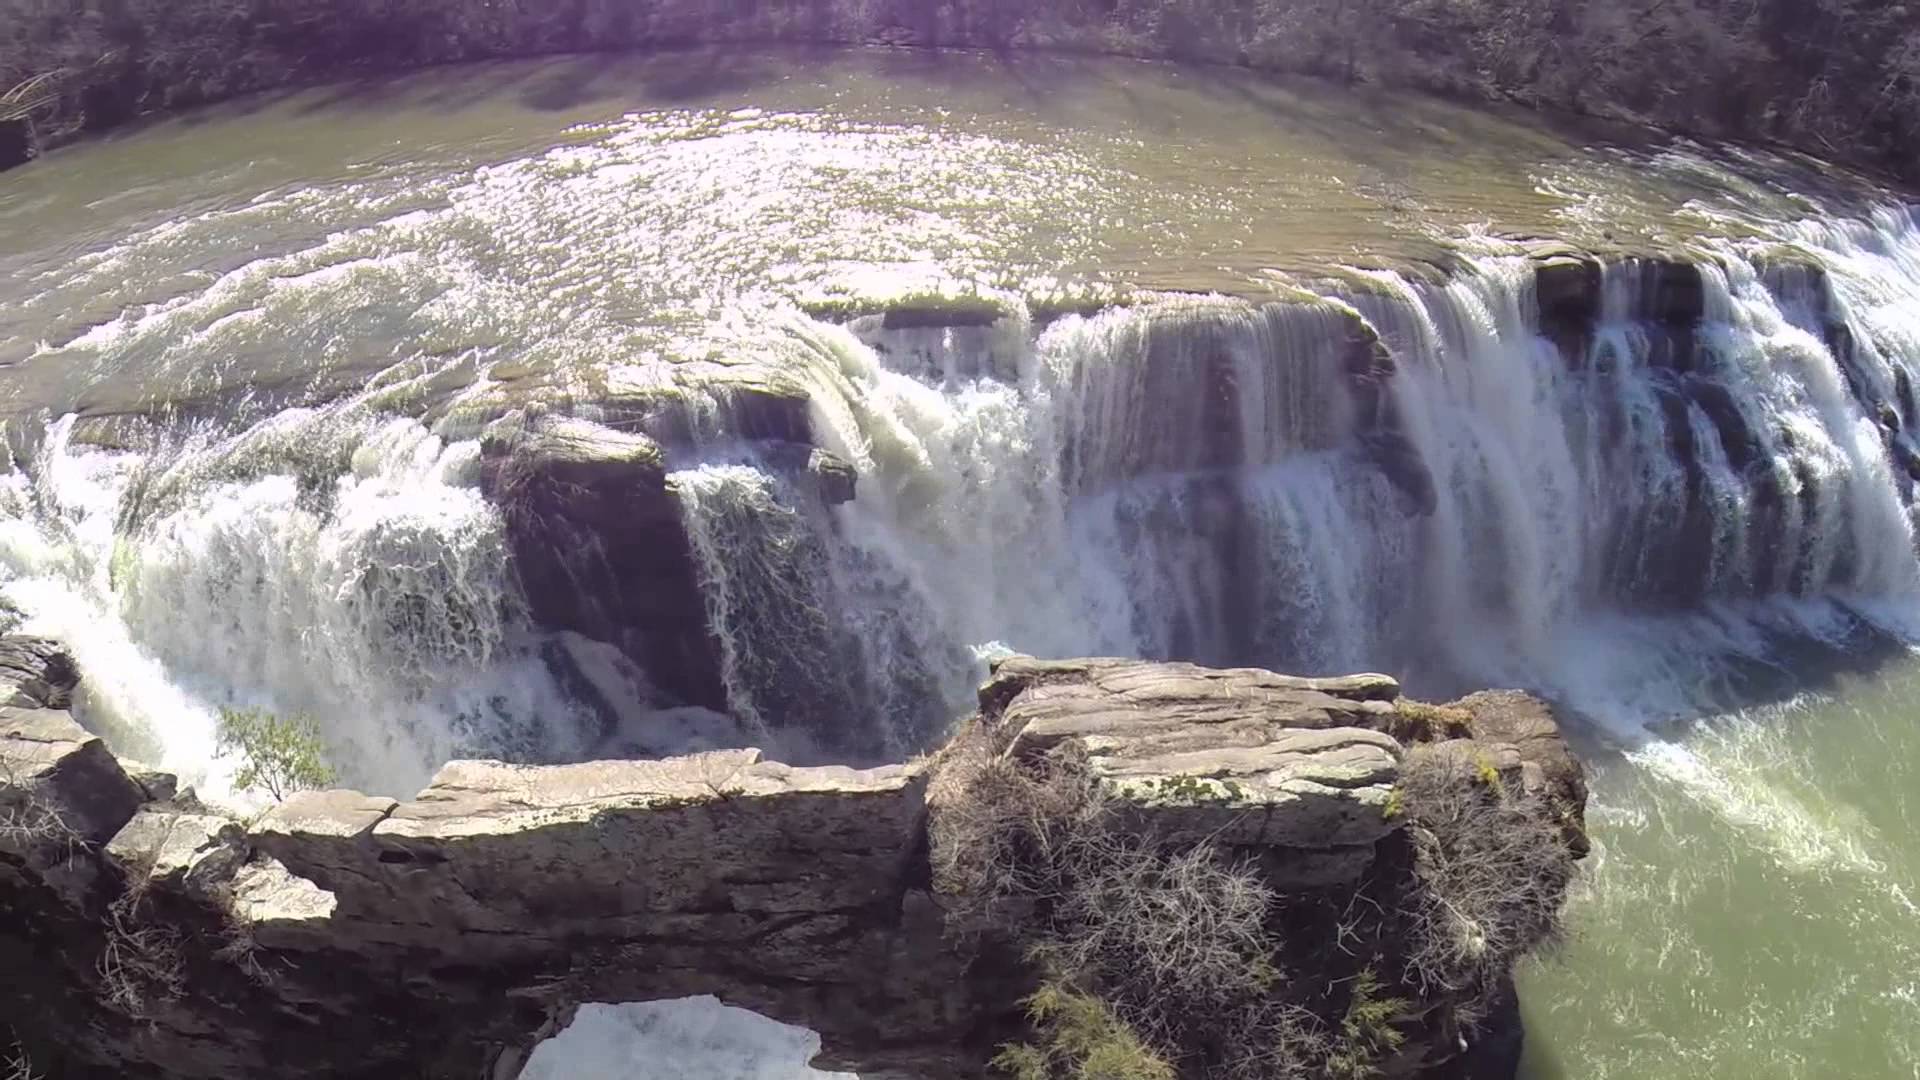 The Width of High Falls is Spectacular